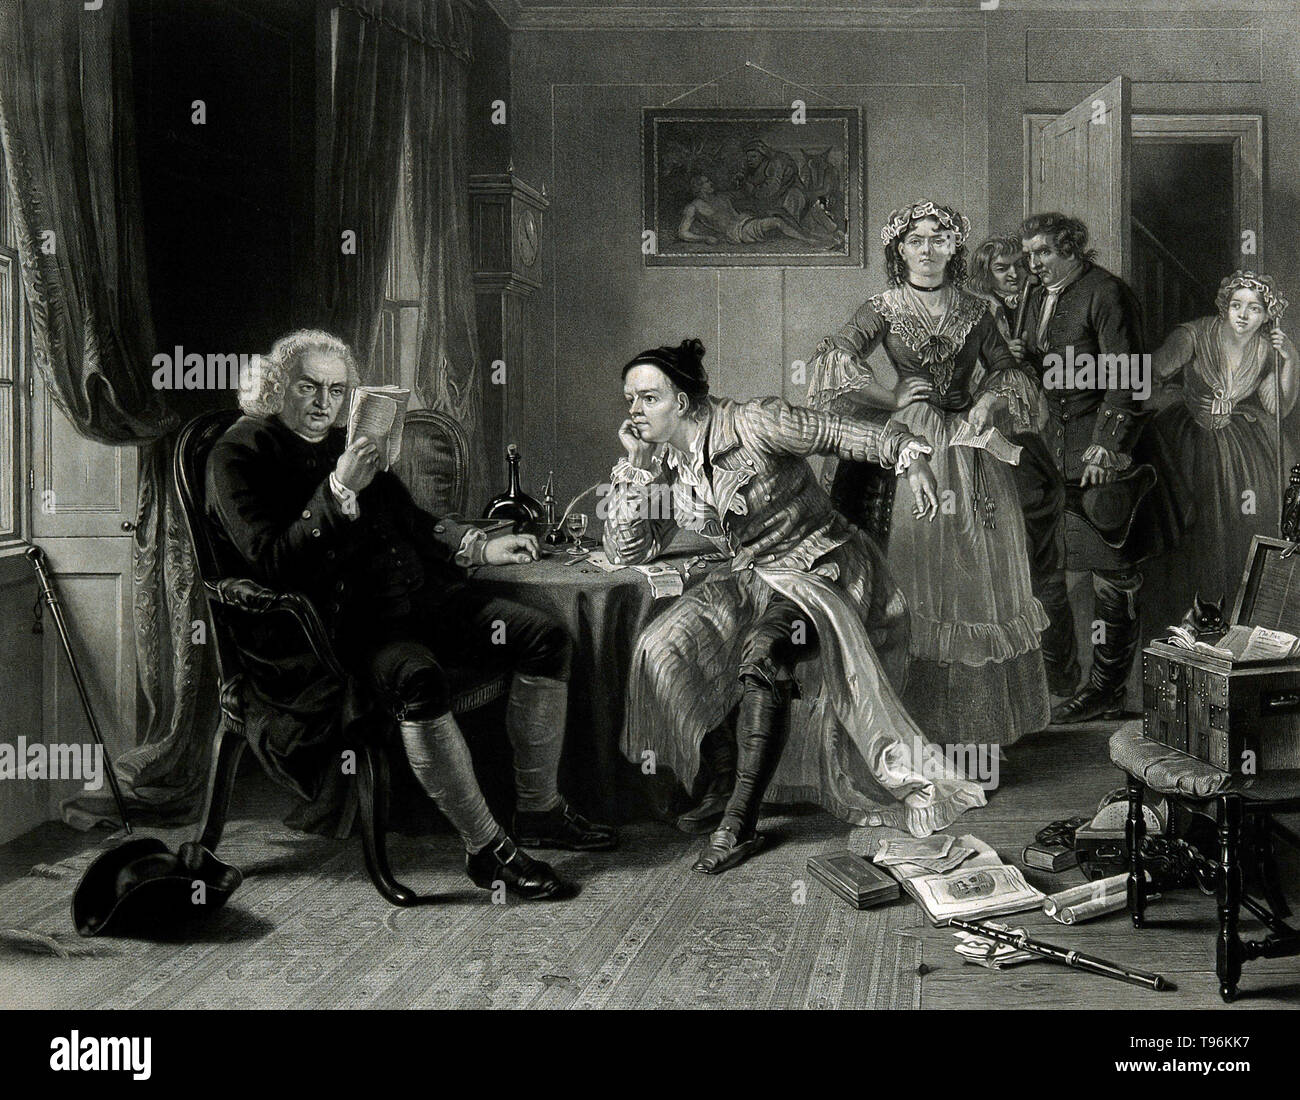 Samuel Johnson reading the manuscript of Oliver Goldsmith's ''The Vicar of Wakefield'', whilst a baliff waits with the landlady. Samuel Johnson (September 18, 1709 - December 13, 1784), often referred to as Dr. Johnson, was an English author who made lasting contributions to English literature as a poet, essayist, moralist, literary critic, biographer, editor and lexicographer. Johnson was a devout Anglican and committed Tory. He is the subject of James Boswell's Life of Samuel Johnson. Stock Photo